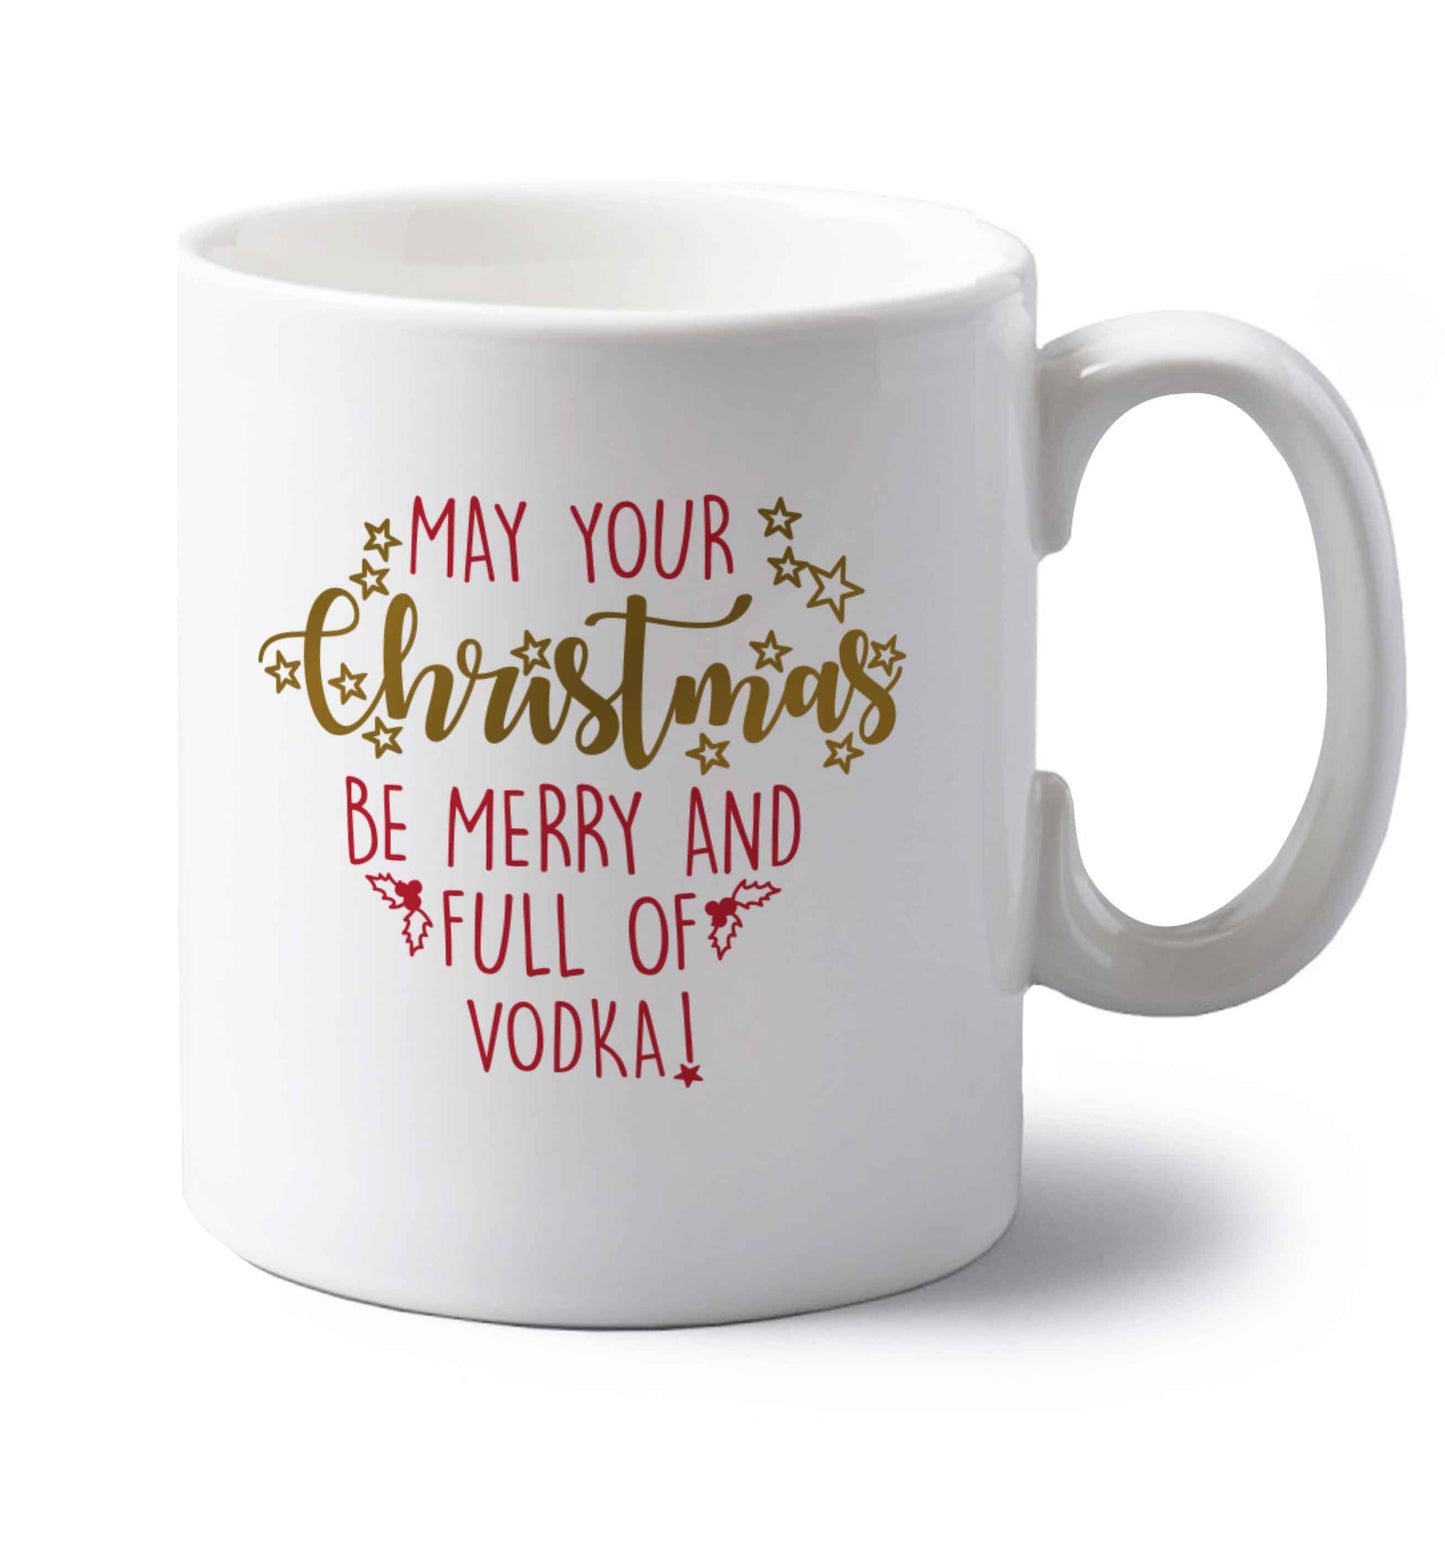 May your Christmas be merry and full of vodka left handed white ceramic mug 